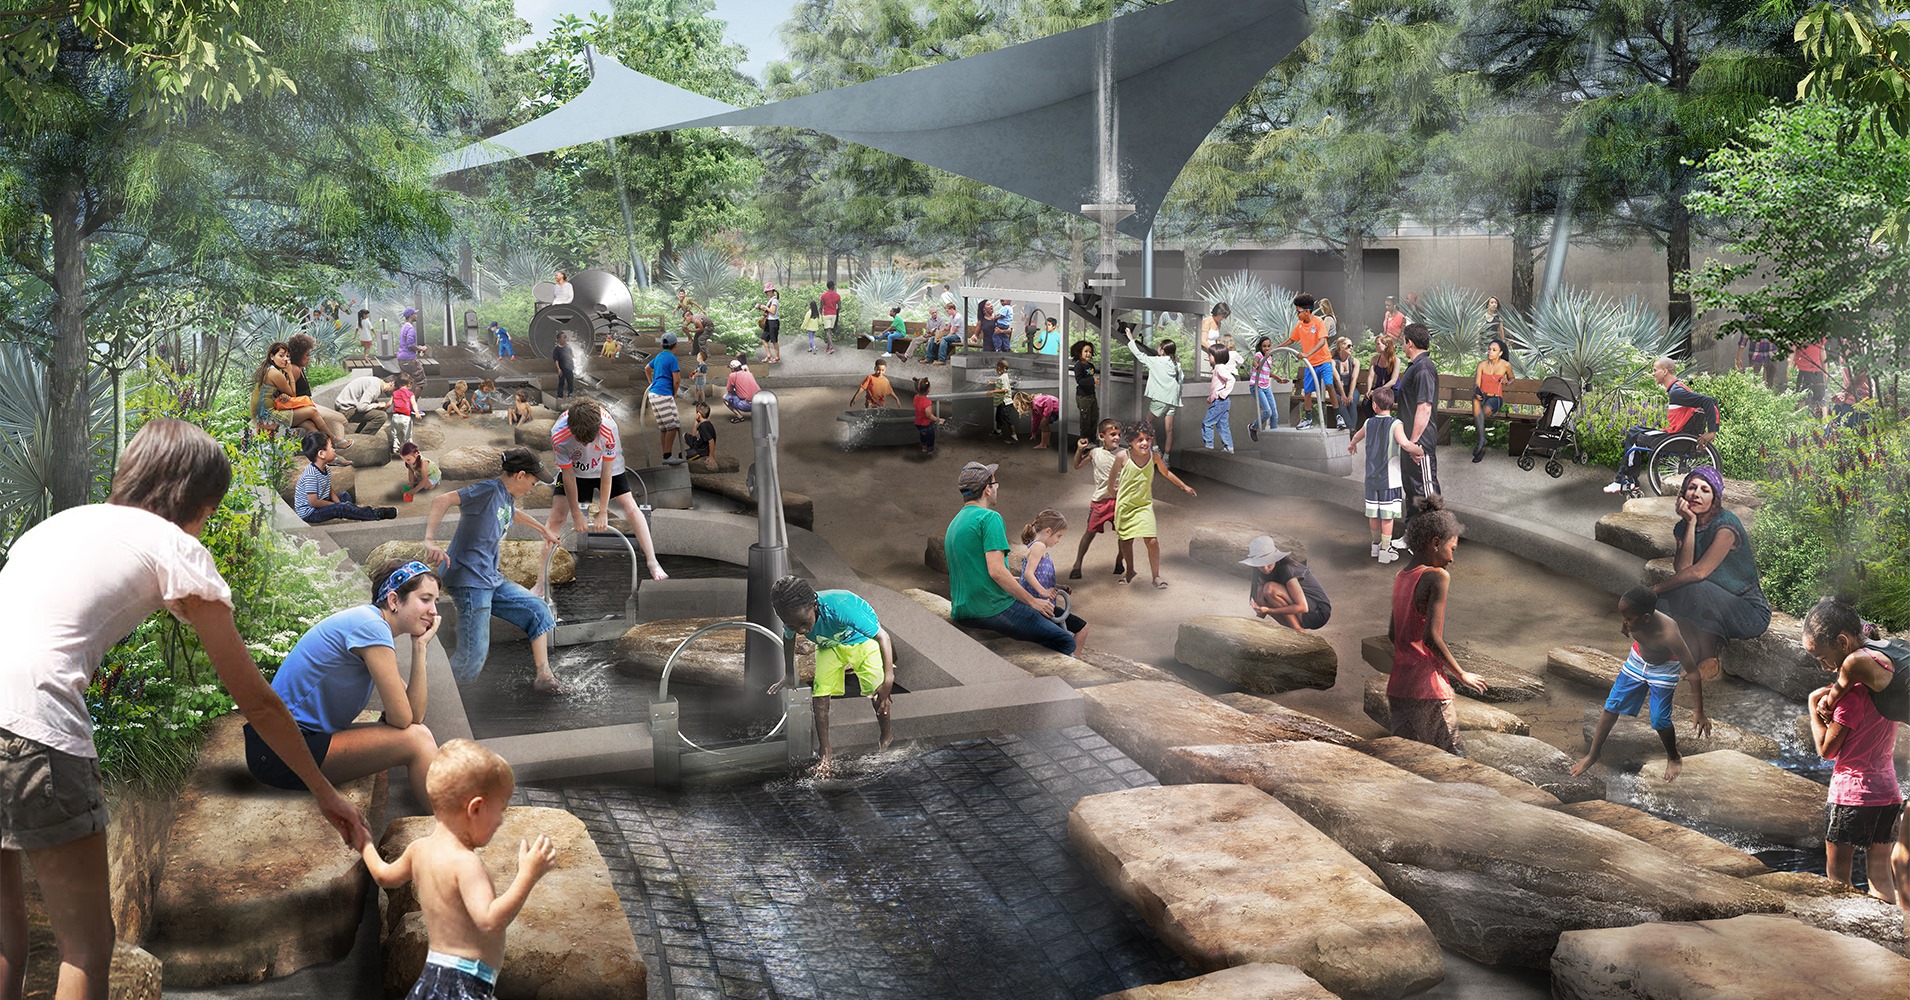 The Water Play Gardens (Rendering Courtesy: Hermann Park Conservancy)